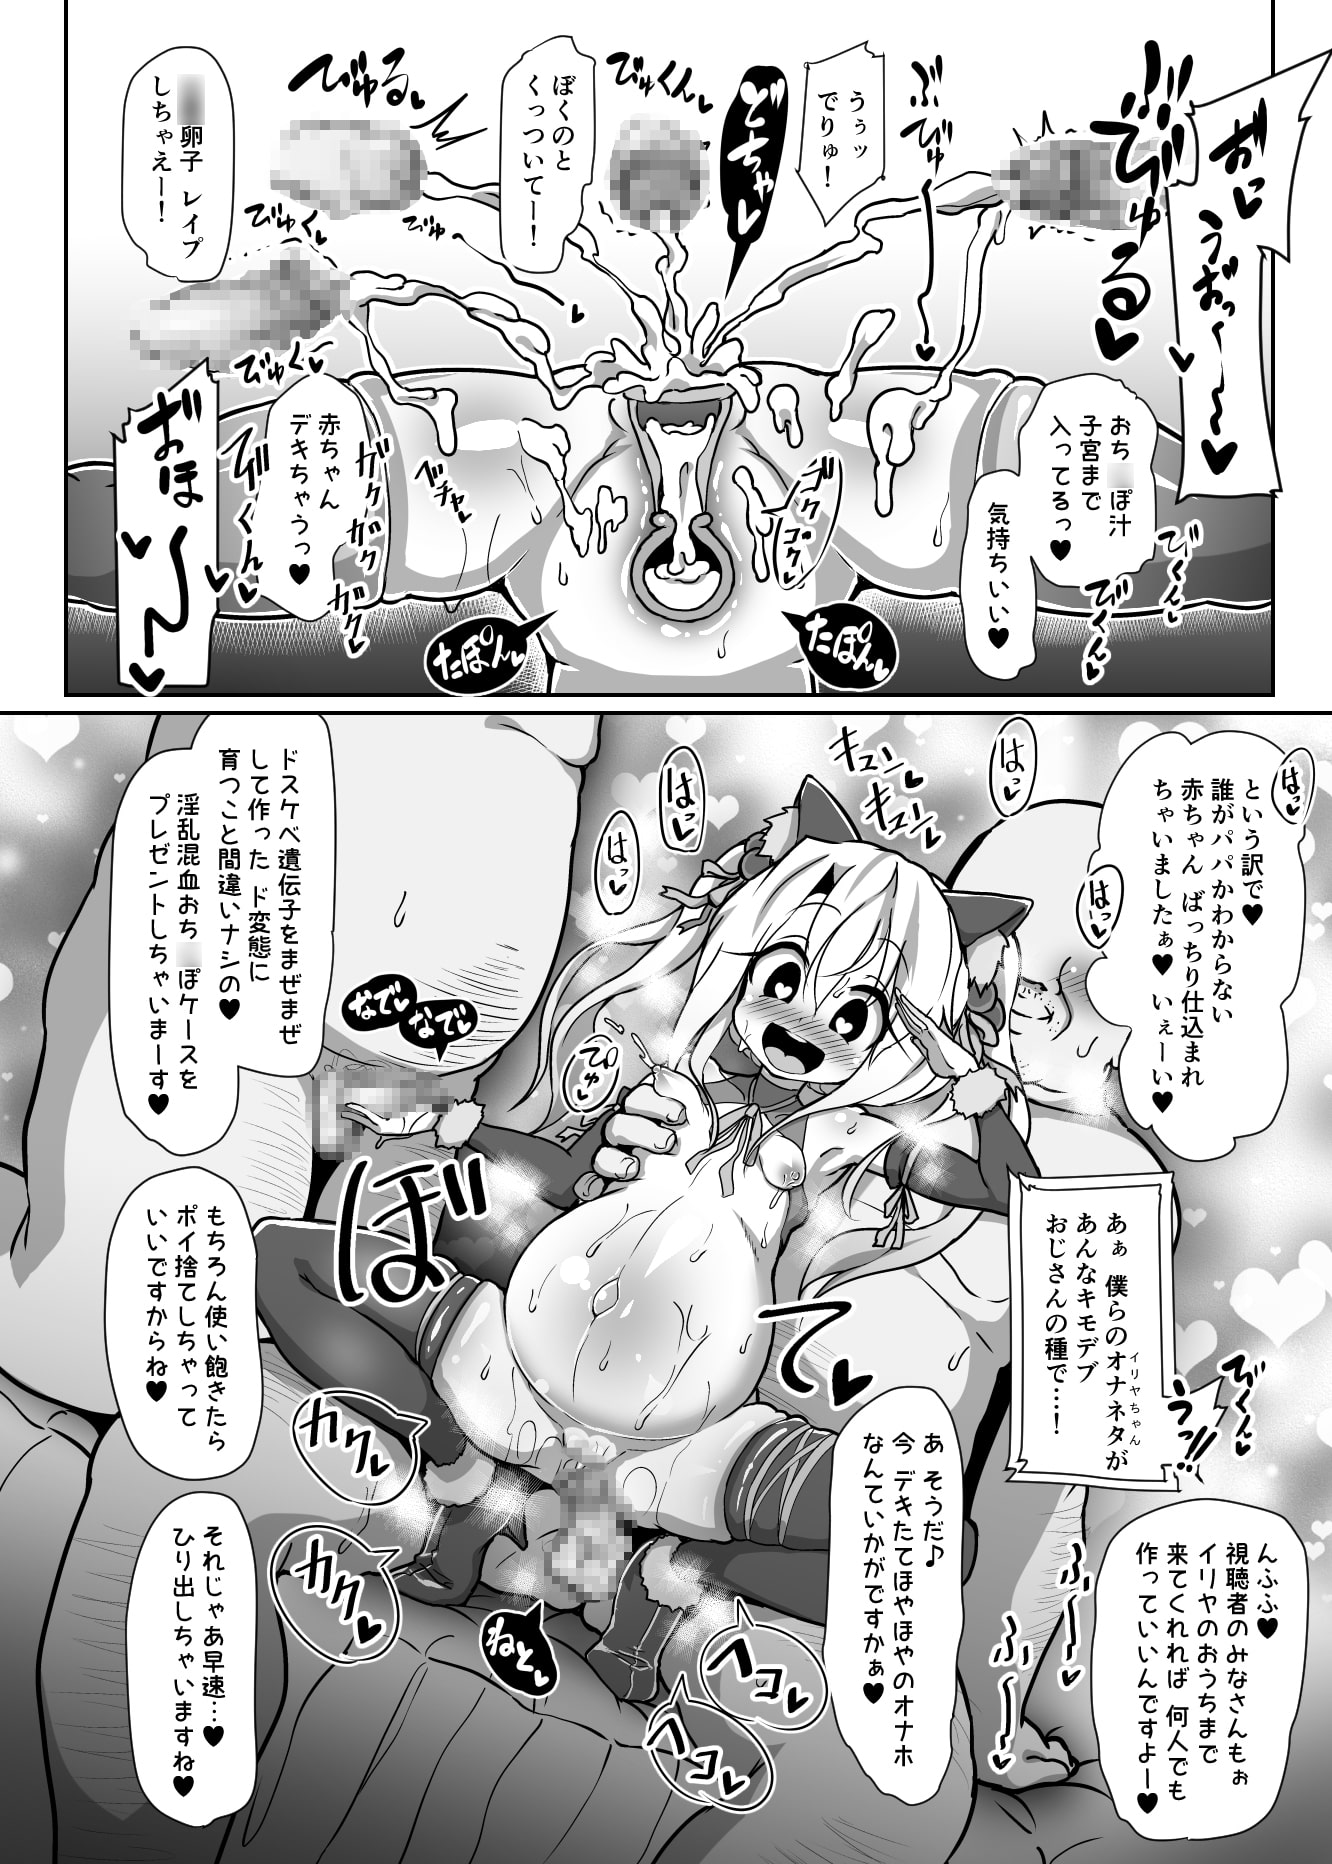 Extremely Lewd Illya-chan's Lovey-Dovey Irresponsible Impregnating Life #2